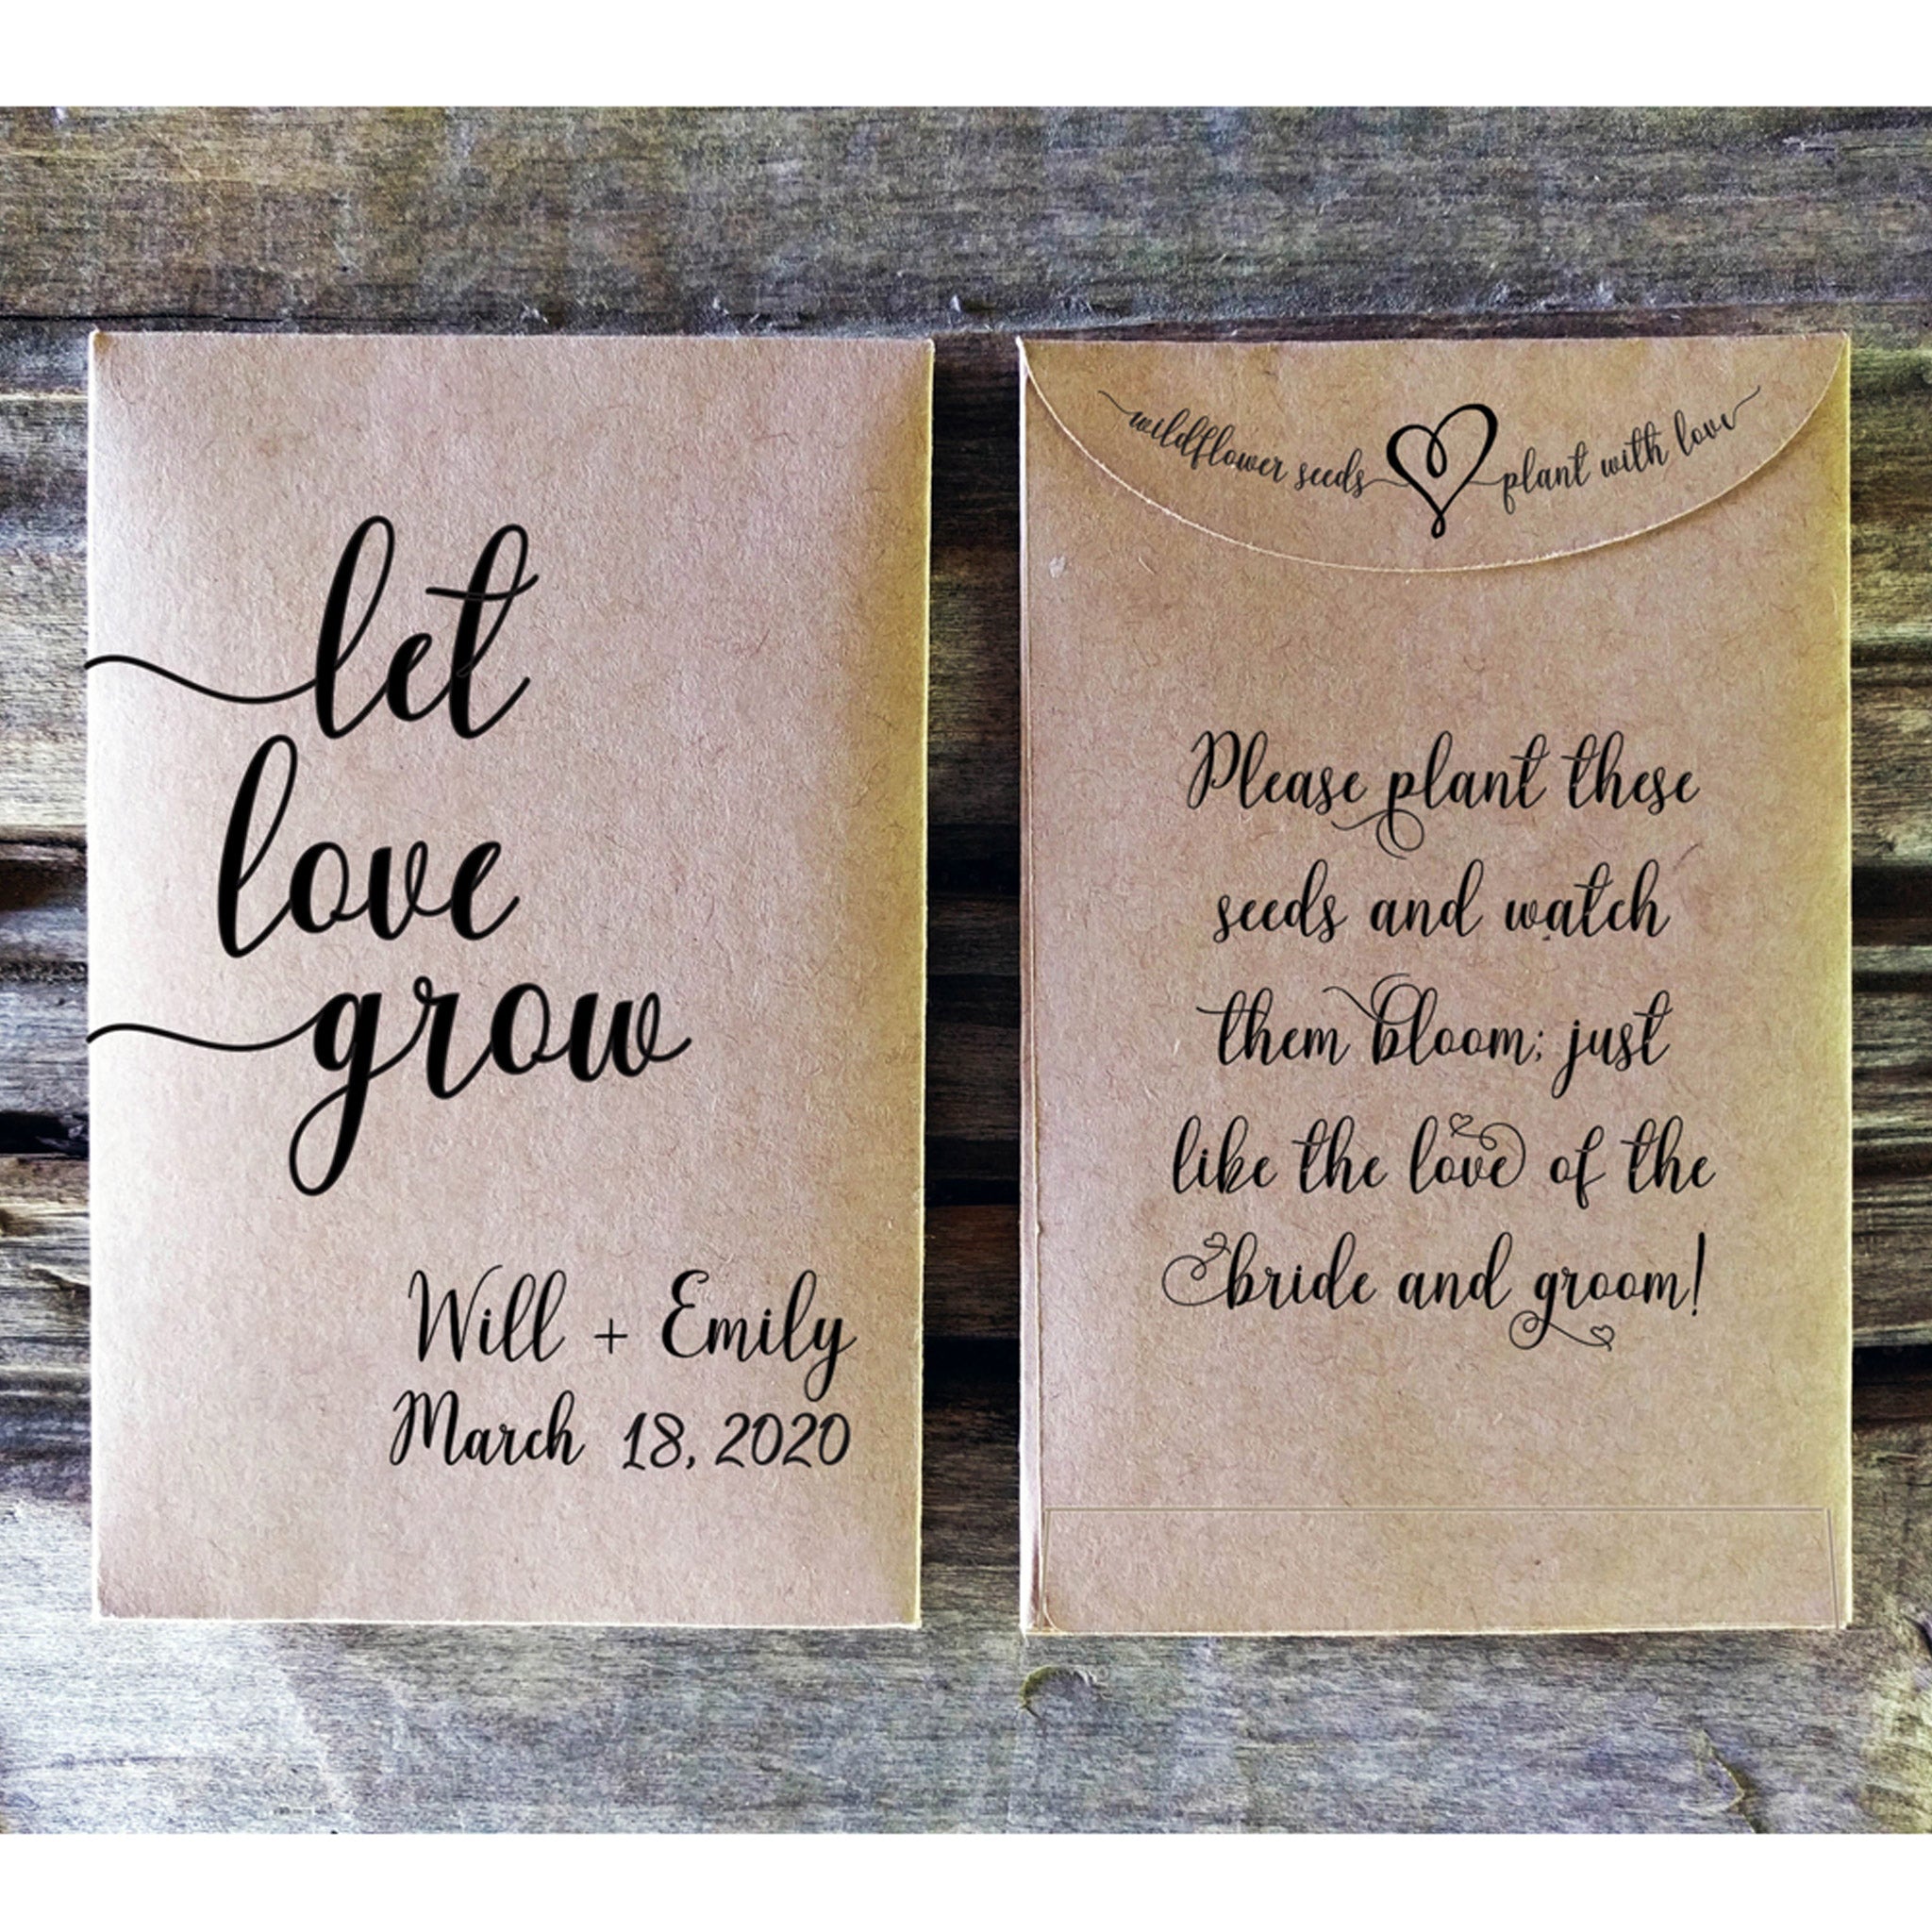 Wedding Favor Seed Packets Let Love Grow Wildflower Rustic Envelopes Favorfully